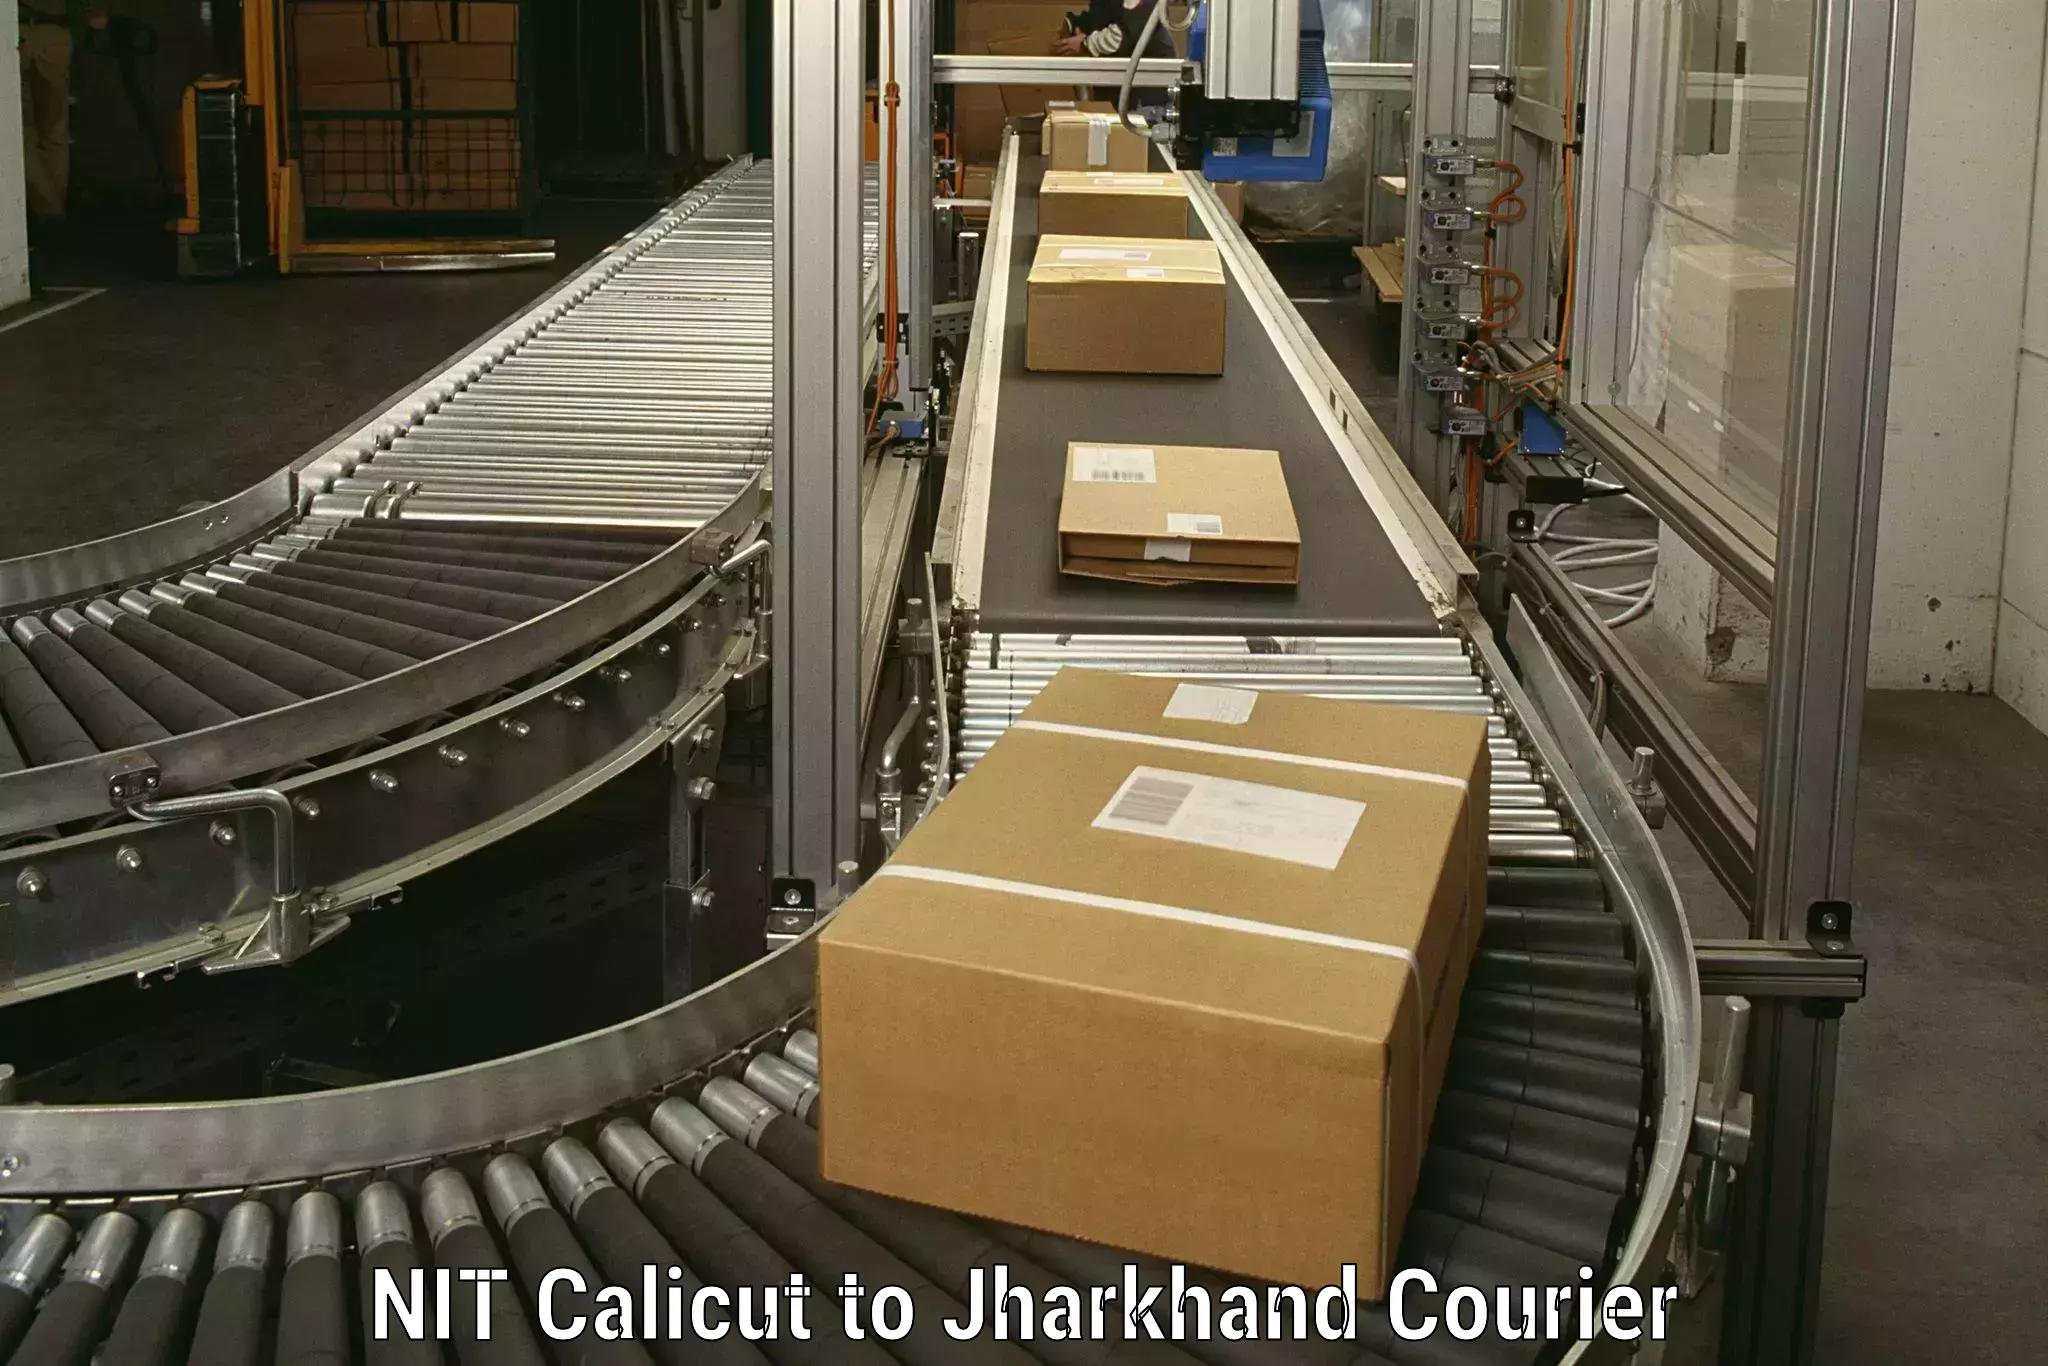 Household goods transport service NIT Calicut to Jharkhand